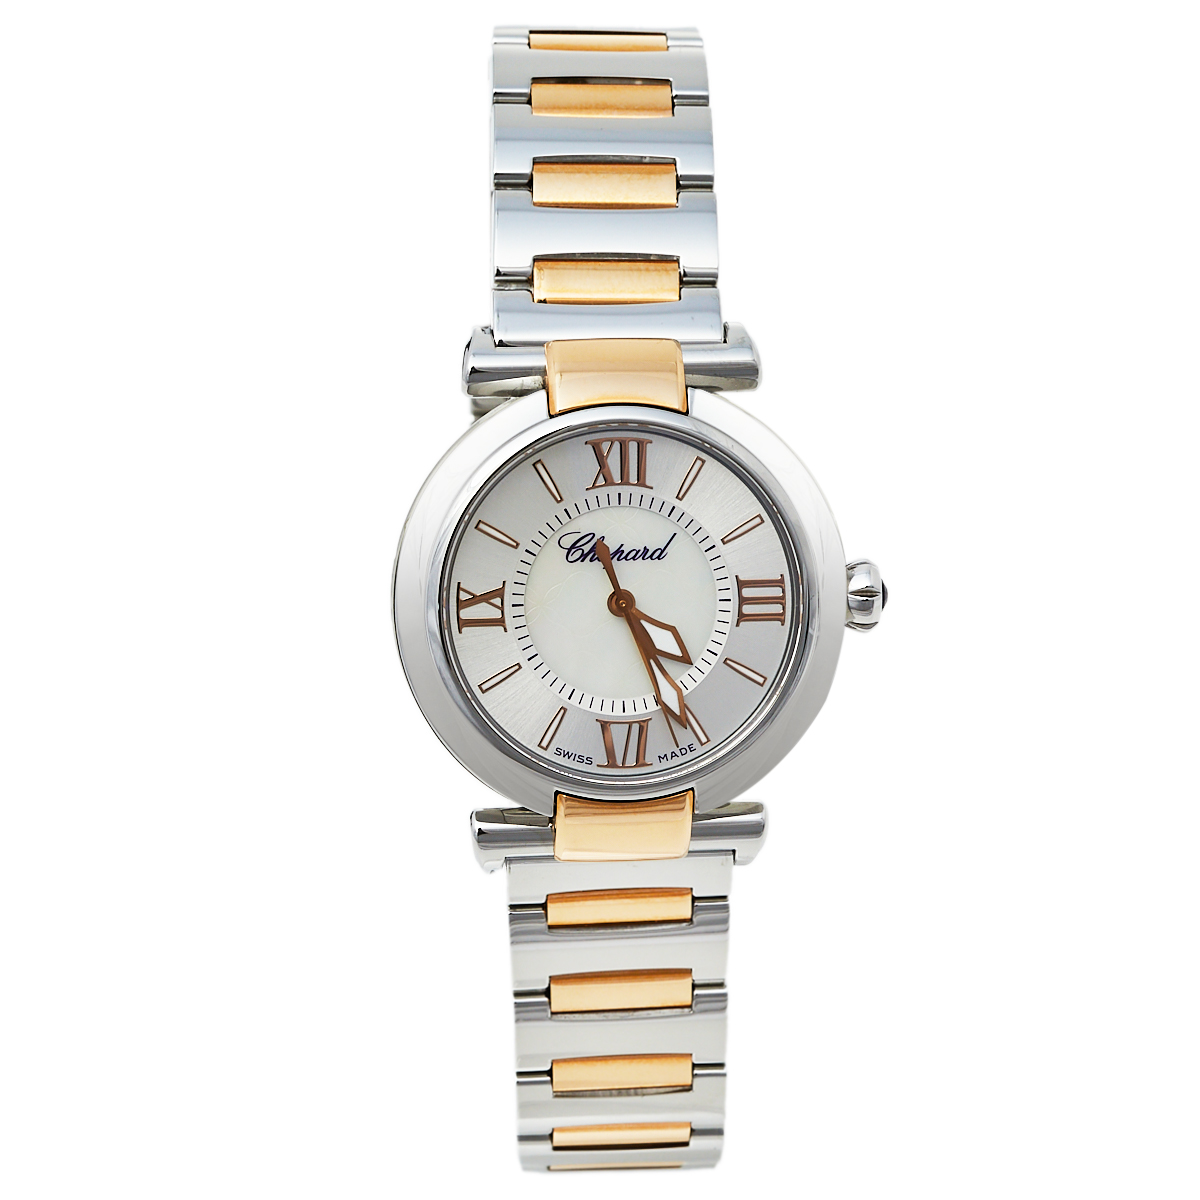 Pre-owned Chopard Silver 18k Rose Gold And Stainless Steel Imperiale 8563 Women's Wristwatch 29mm